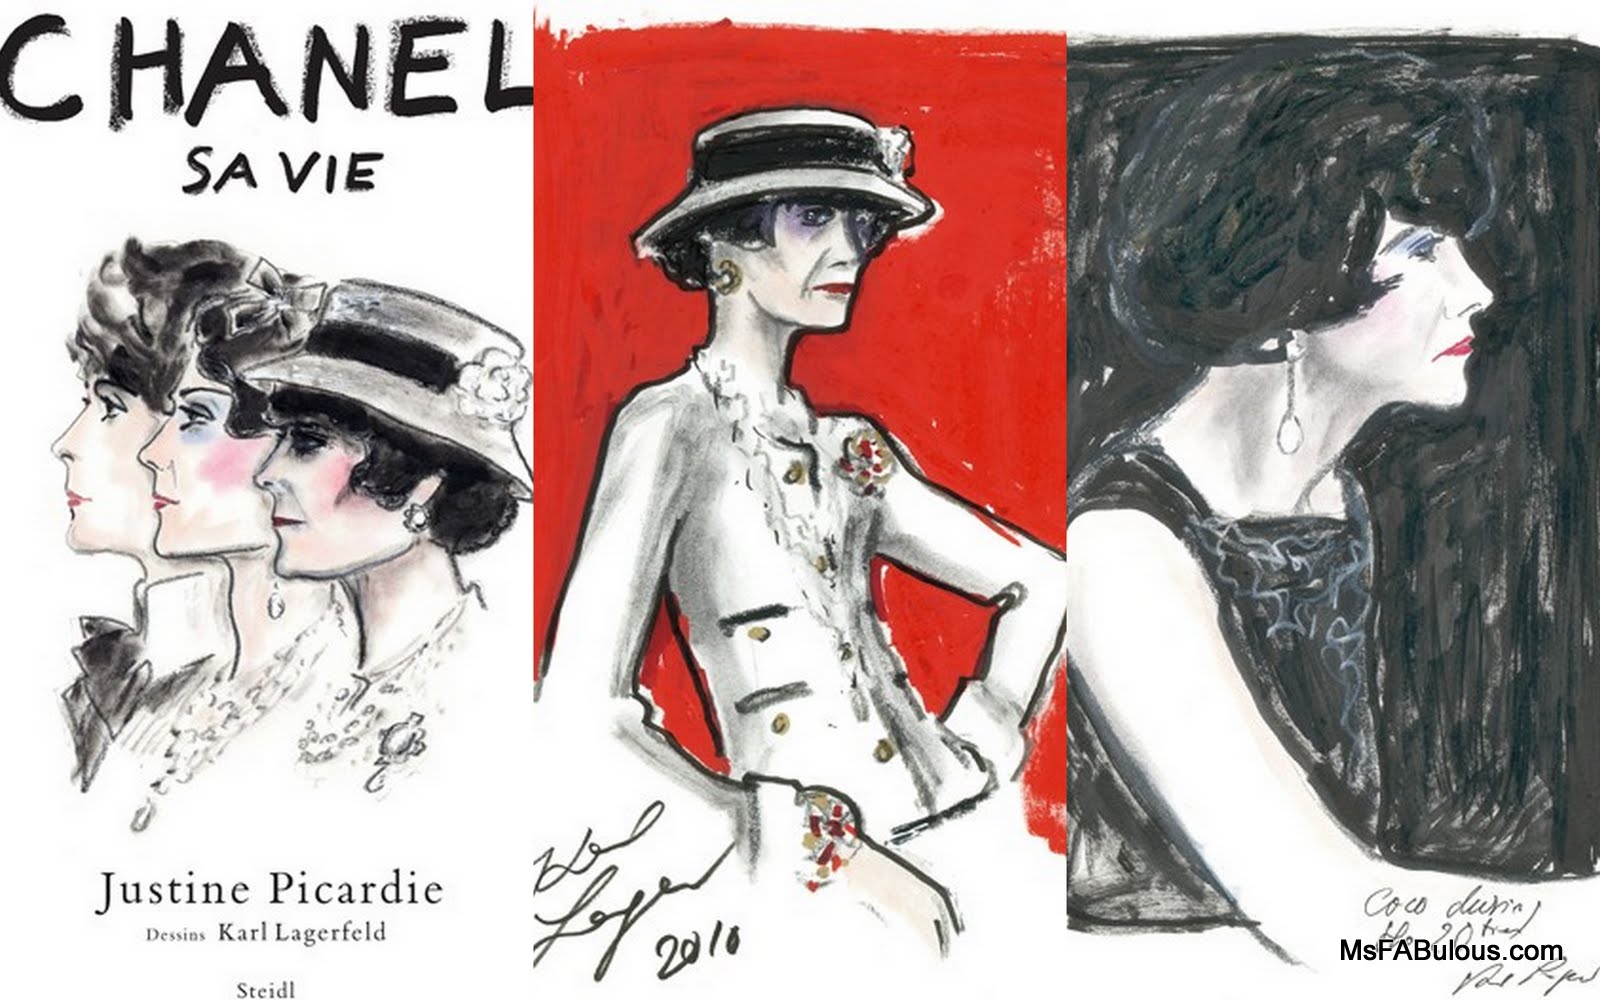 MS. FABULOUS: Karl Lagerfeld Sketches Chanel for Bio